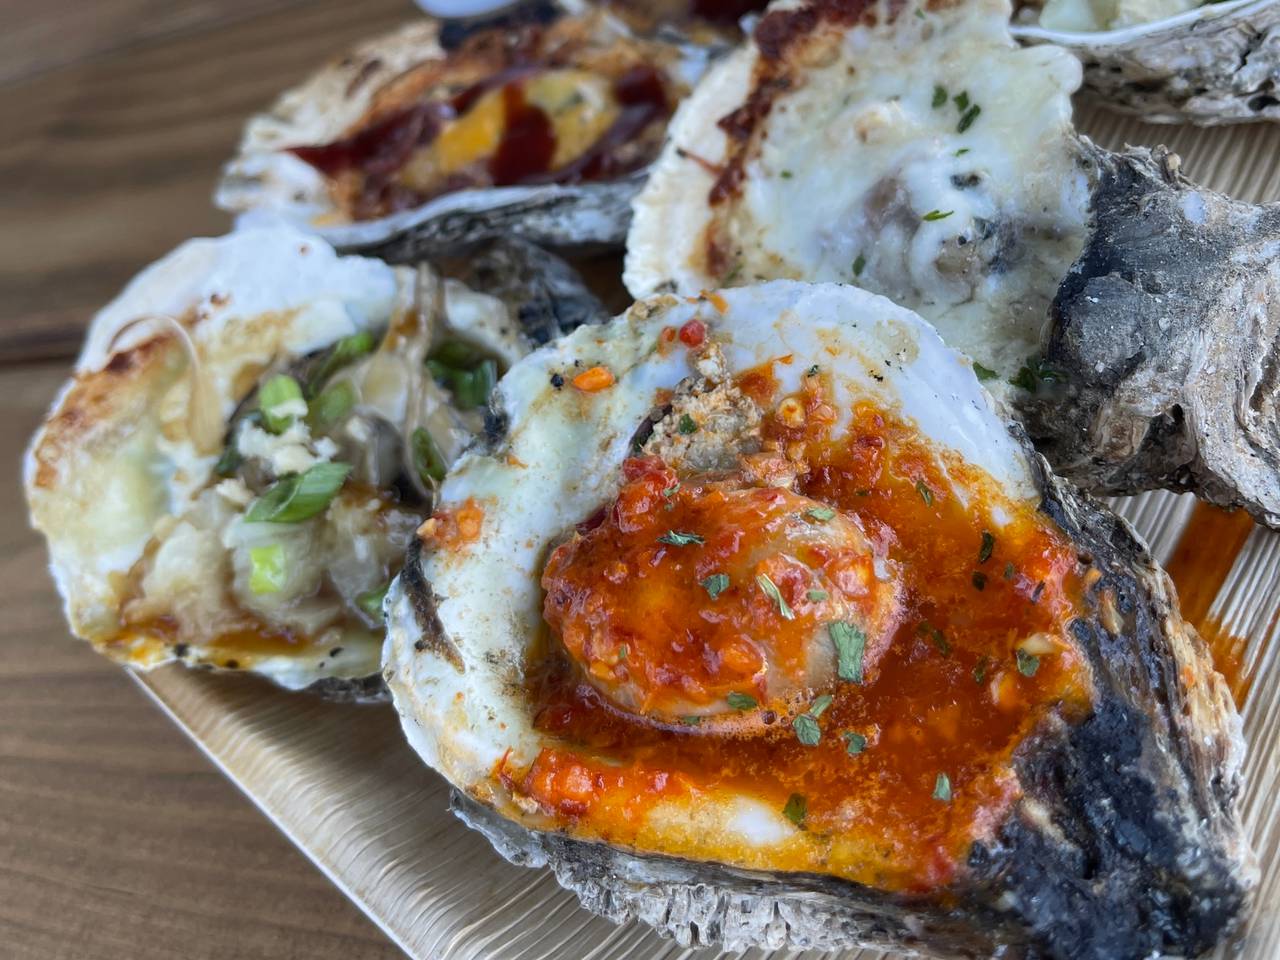 Chargrilled oysters from The Urban Oyster.